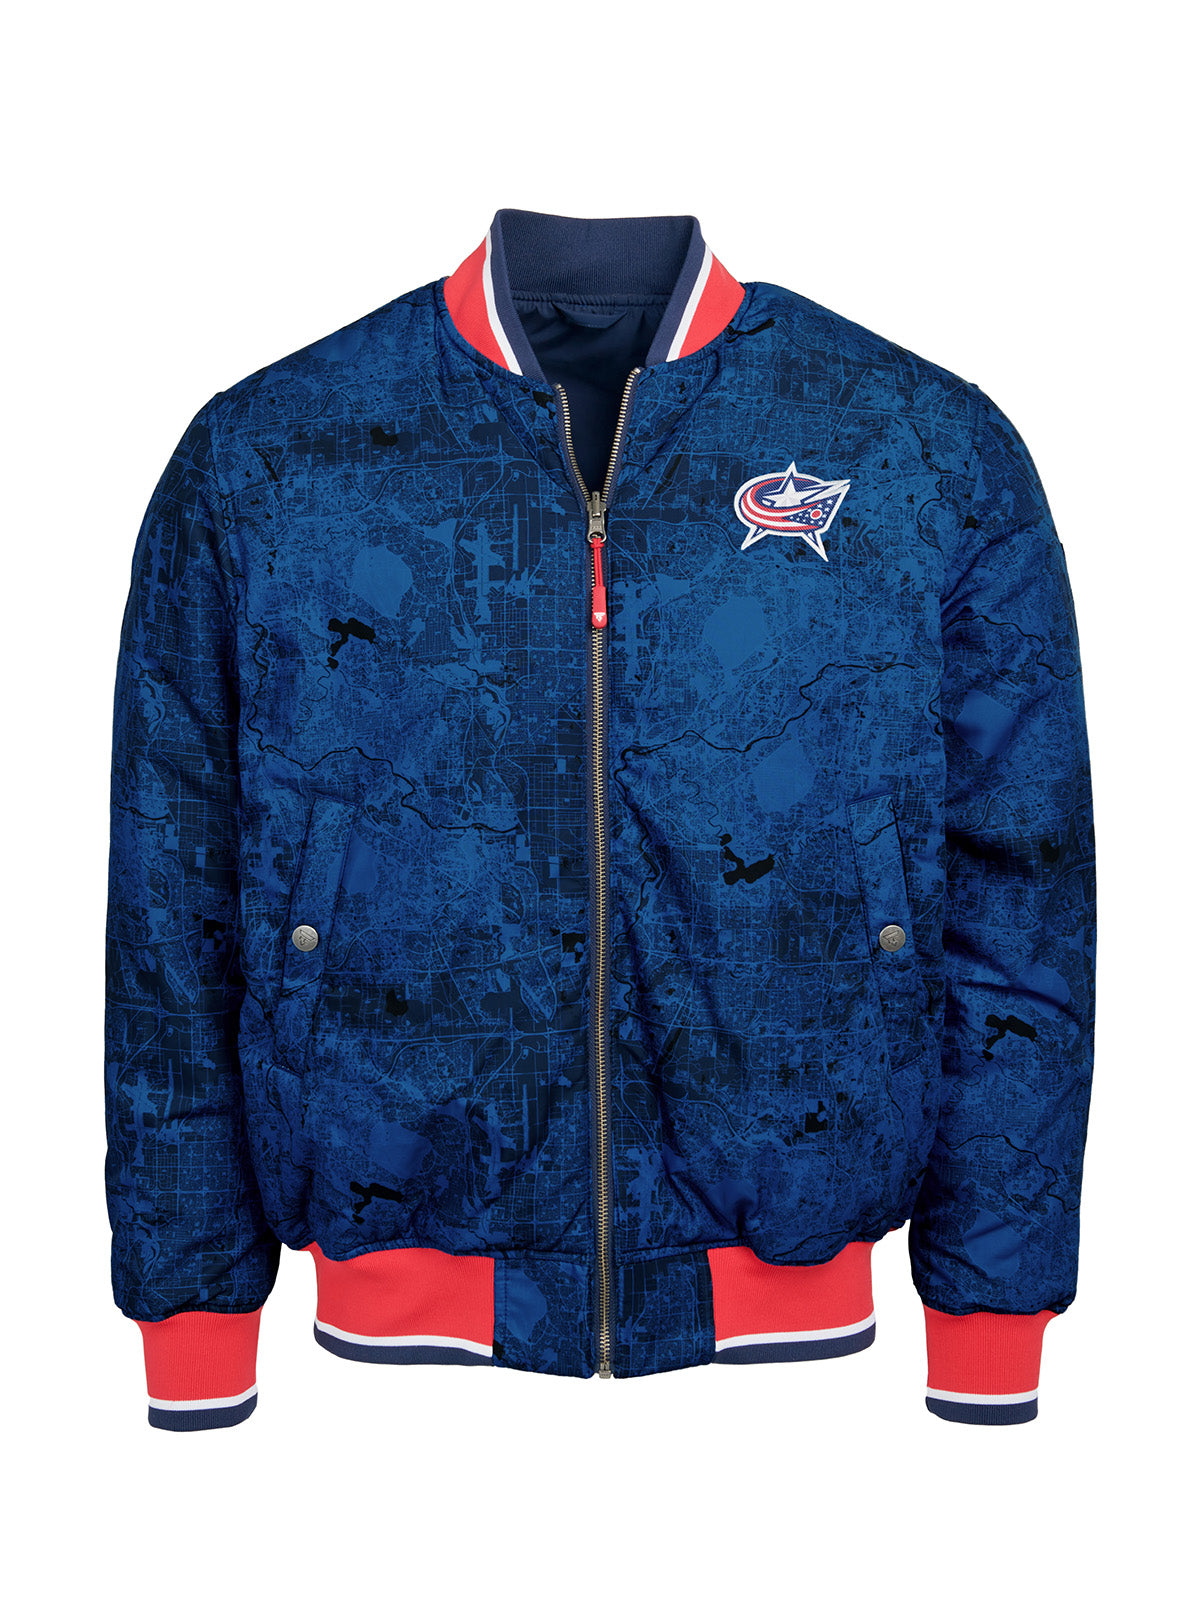 Columbus Blue Jackets Bomber - Reversible bomber jacket featuring the iconic Columbus Blue Jackets logo with ribbed cuffs, collar and hem in the team colors